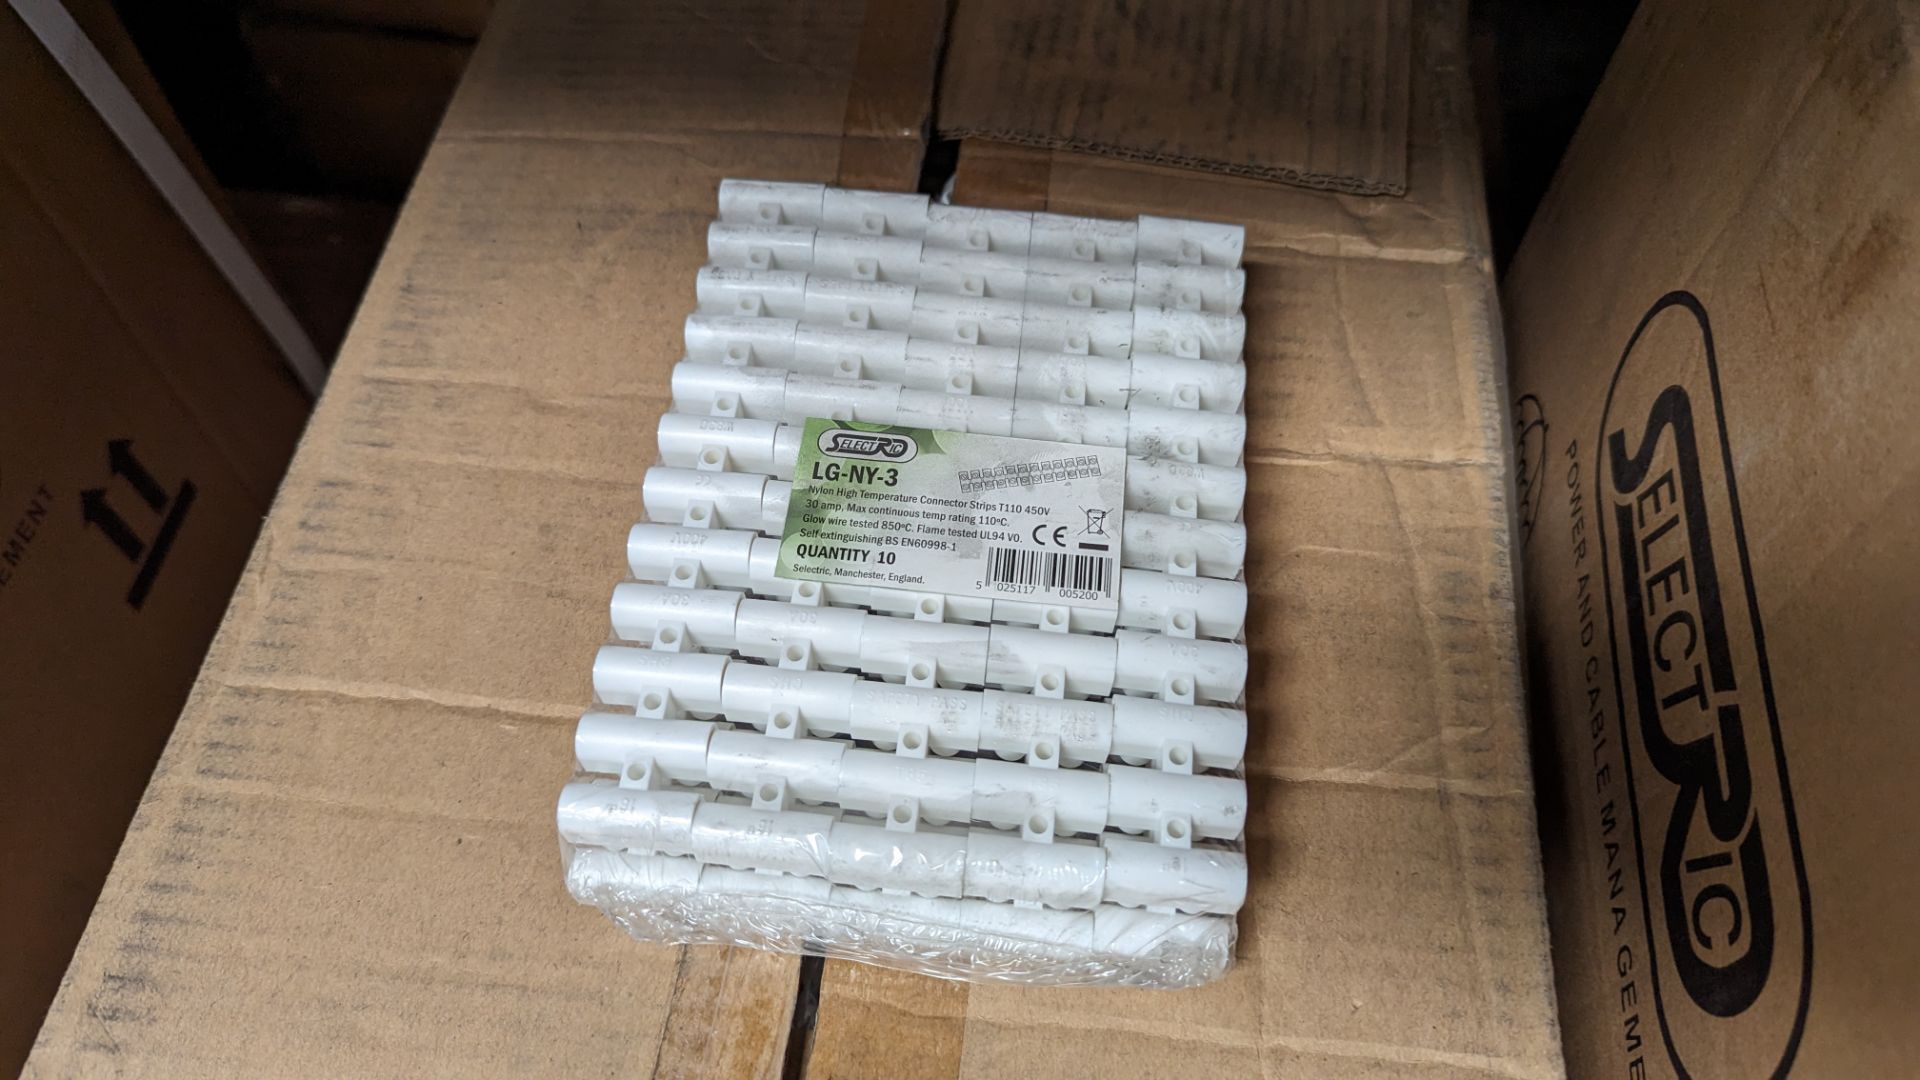 2 boxes (600 pieces total) of Selectric LG-NY-3 nylon high temperature connector strips, 30 amp - Image 3 of 4